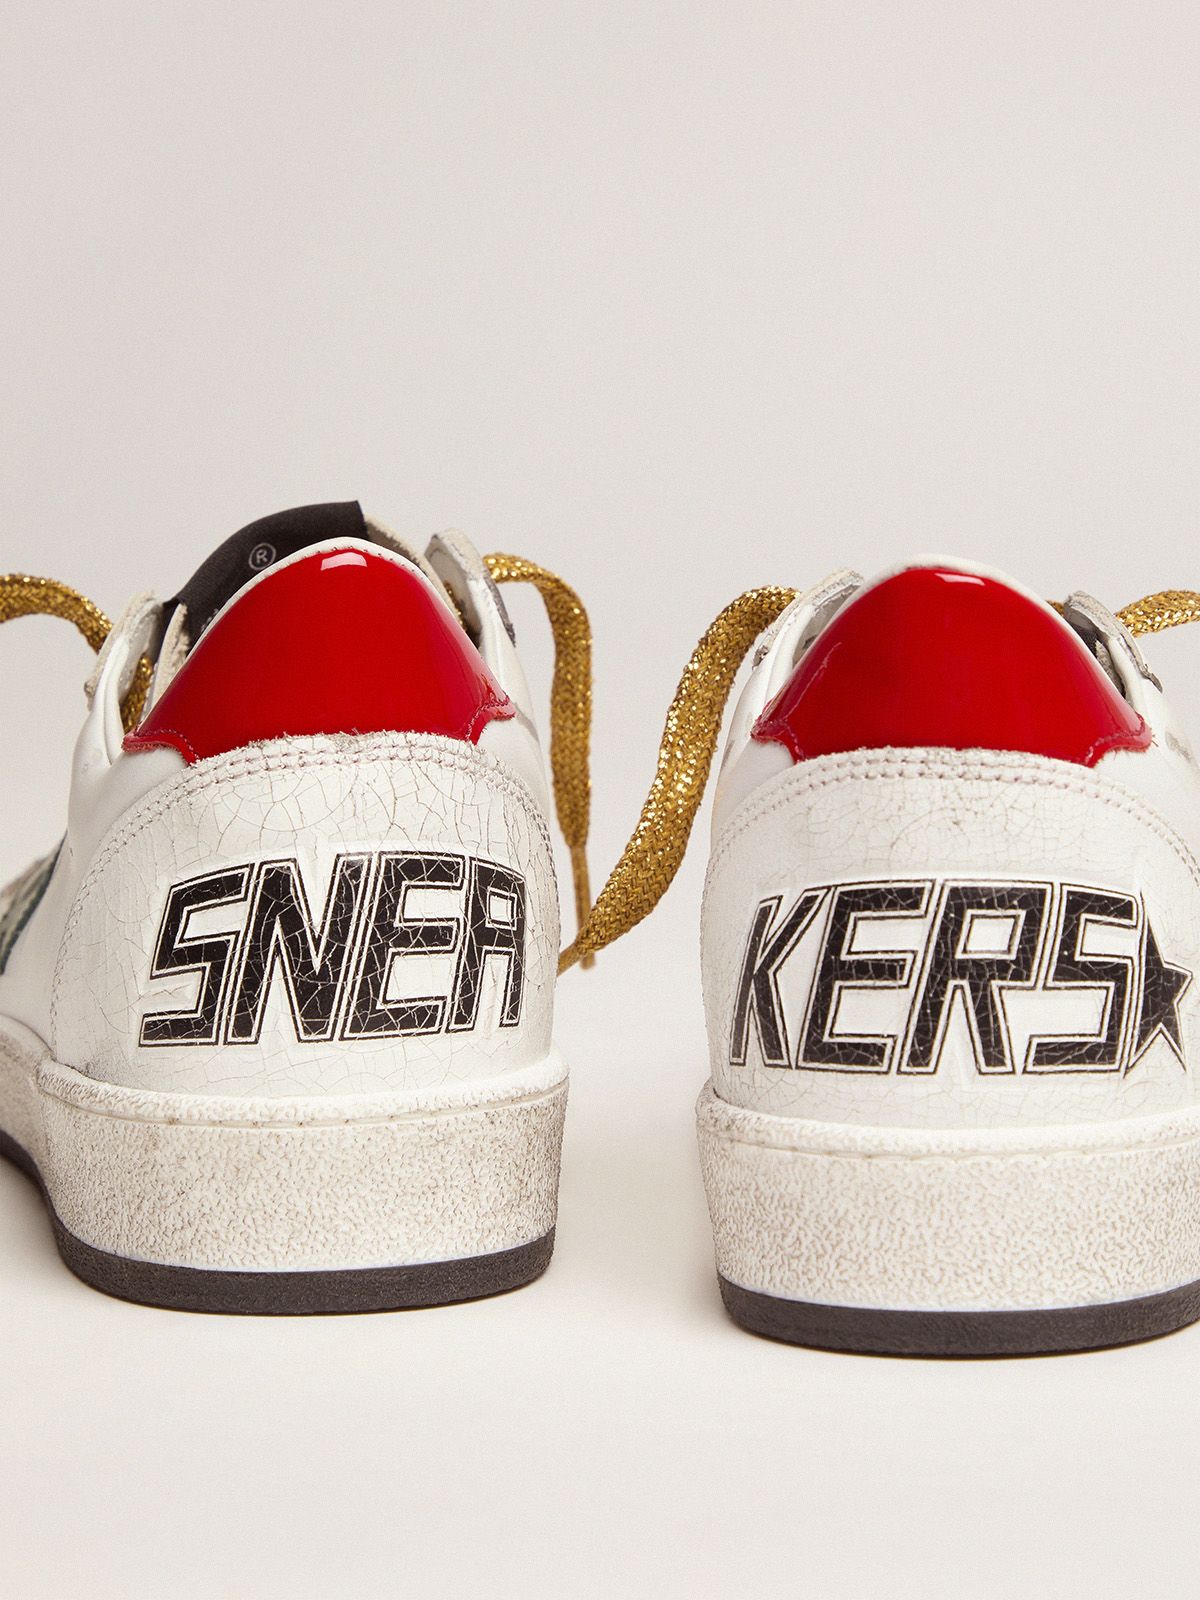 Ball Star sneakers with green star and red heel tab